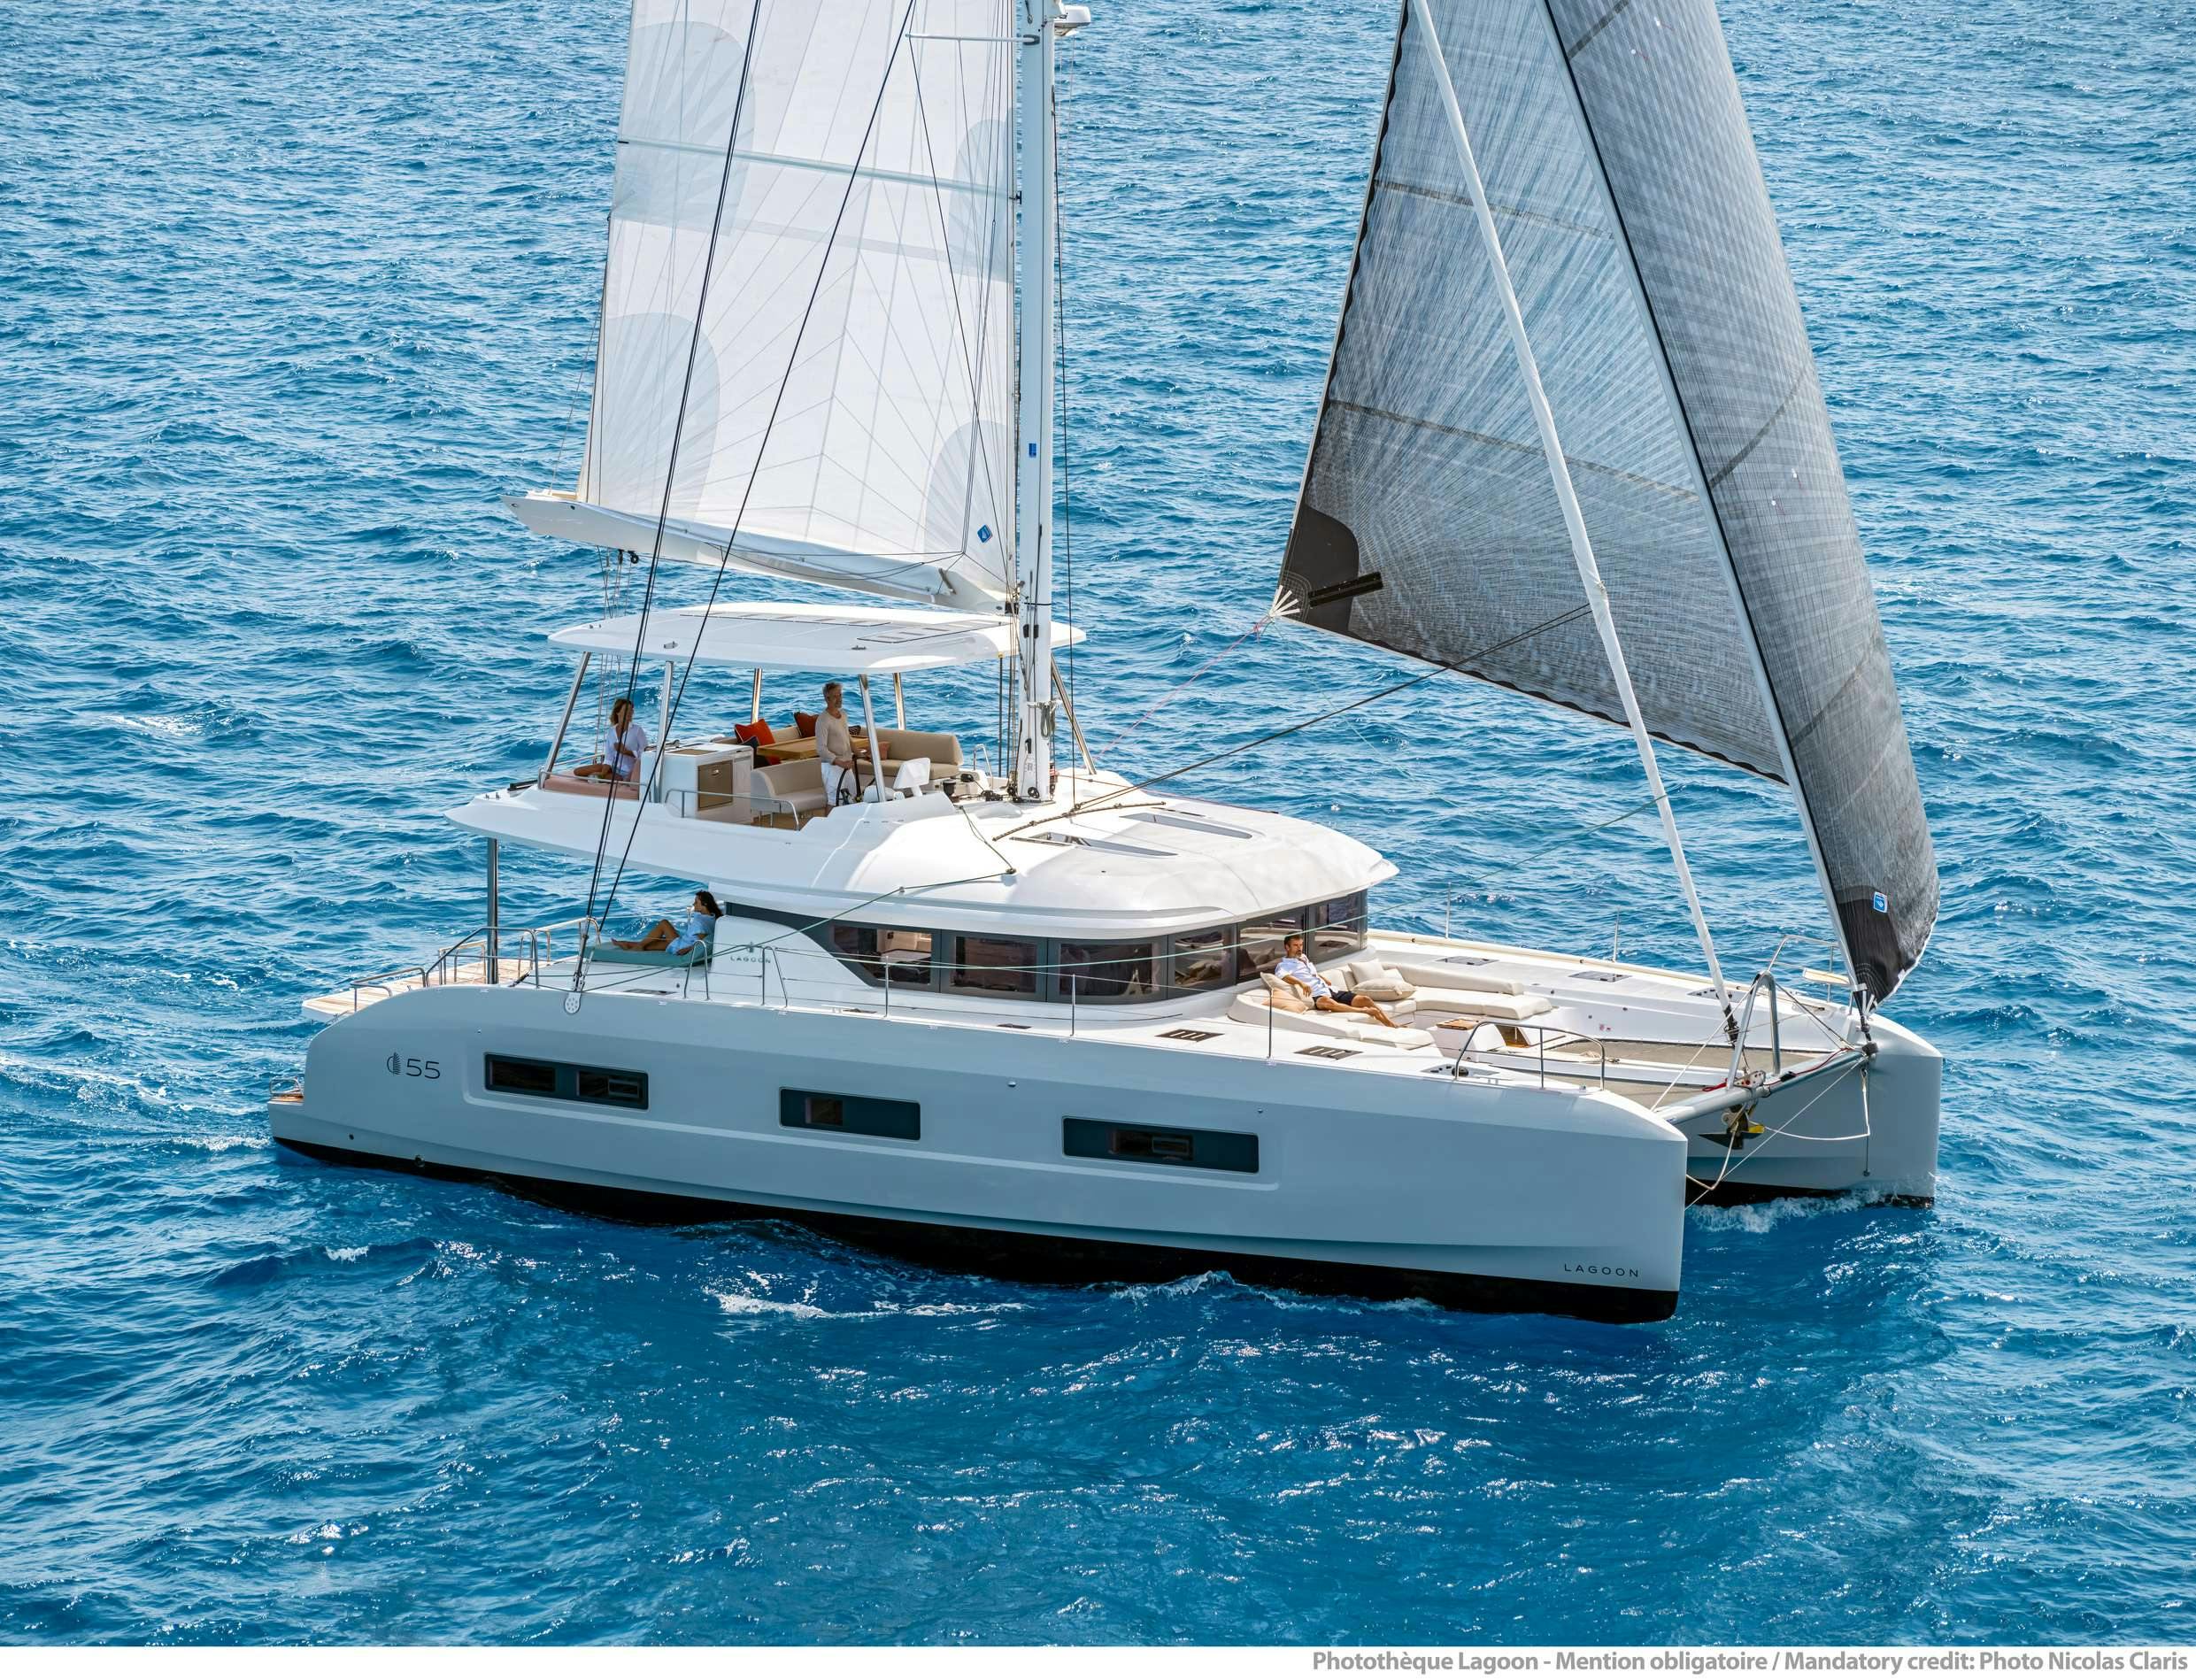 VALIUM 55 - Yacht Charter Rhodes & Boat hire in Greece 1